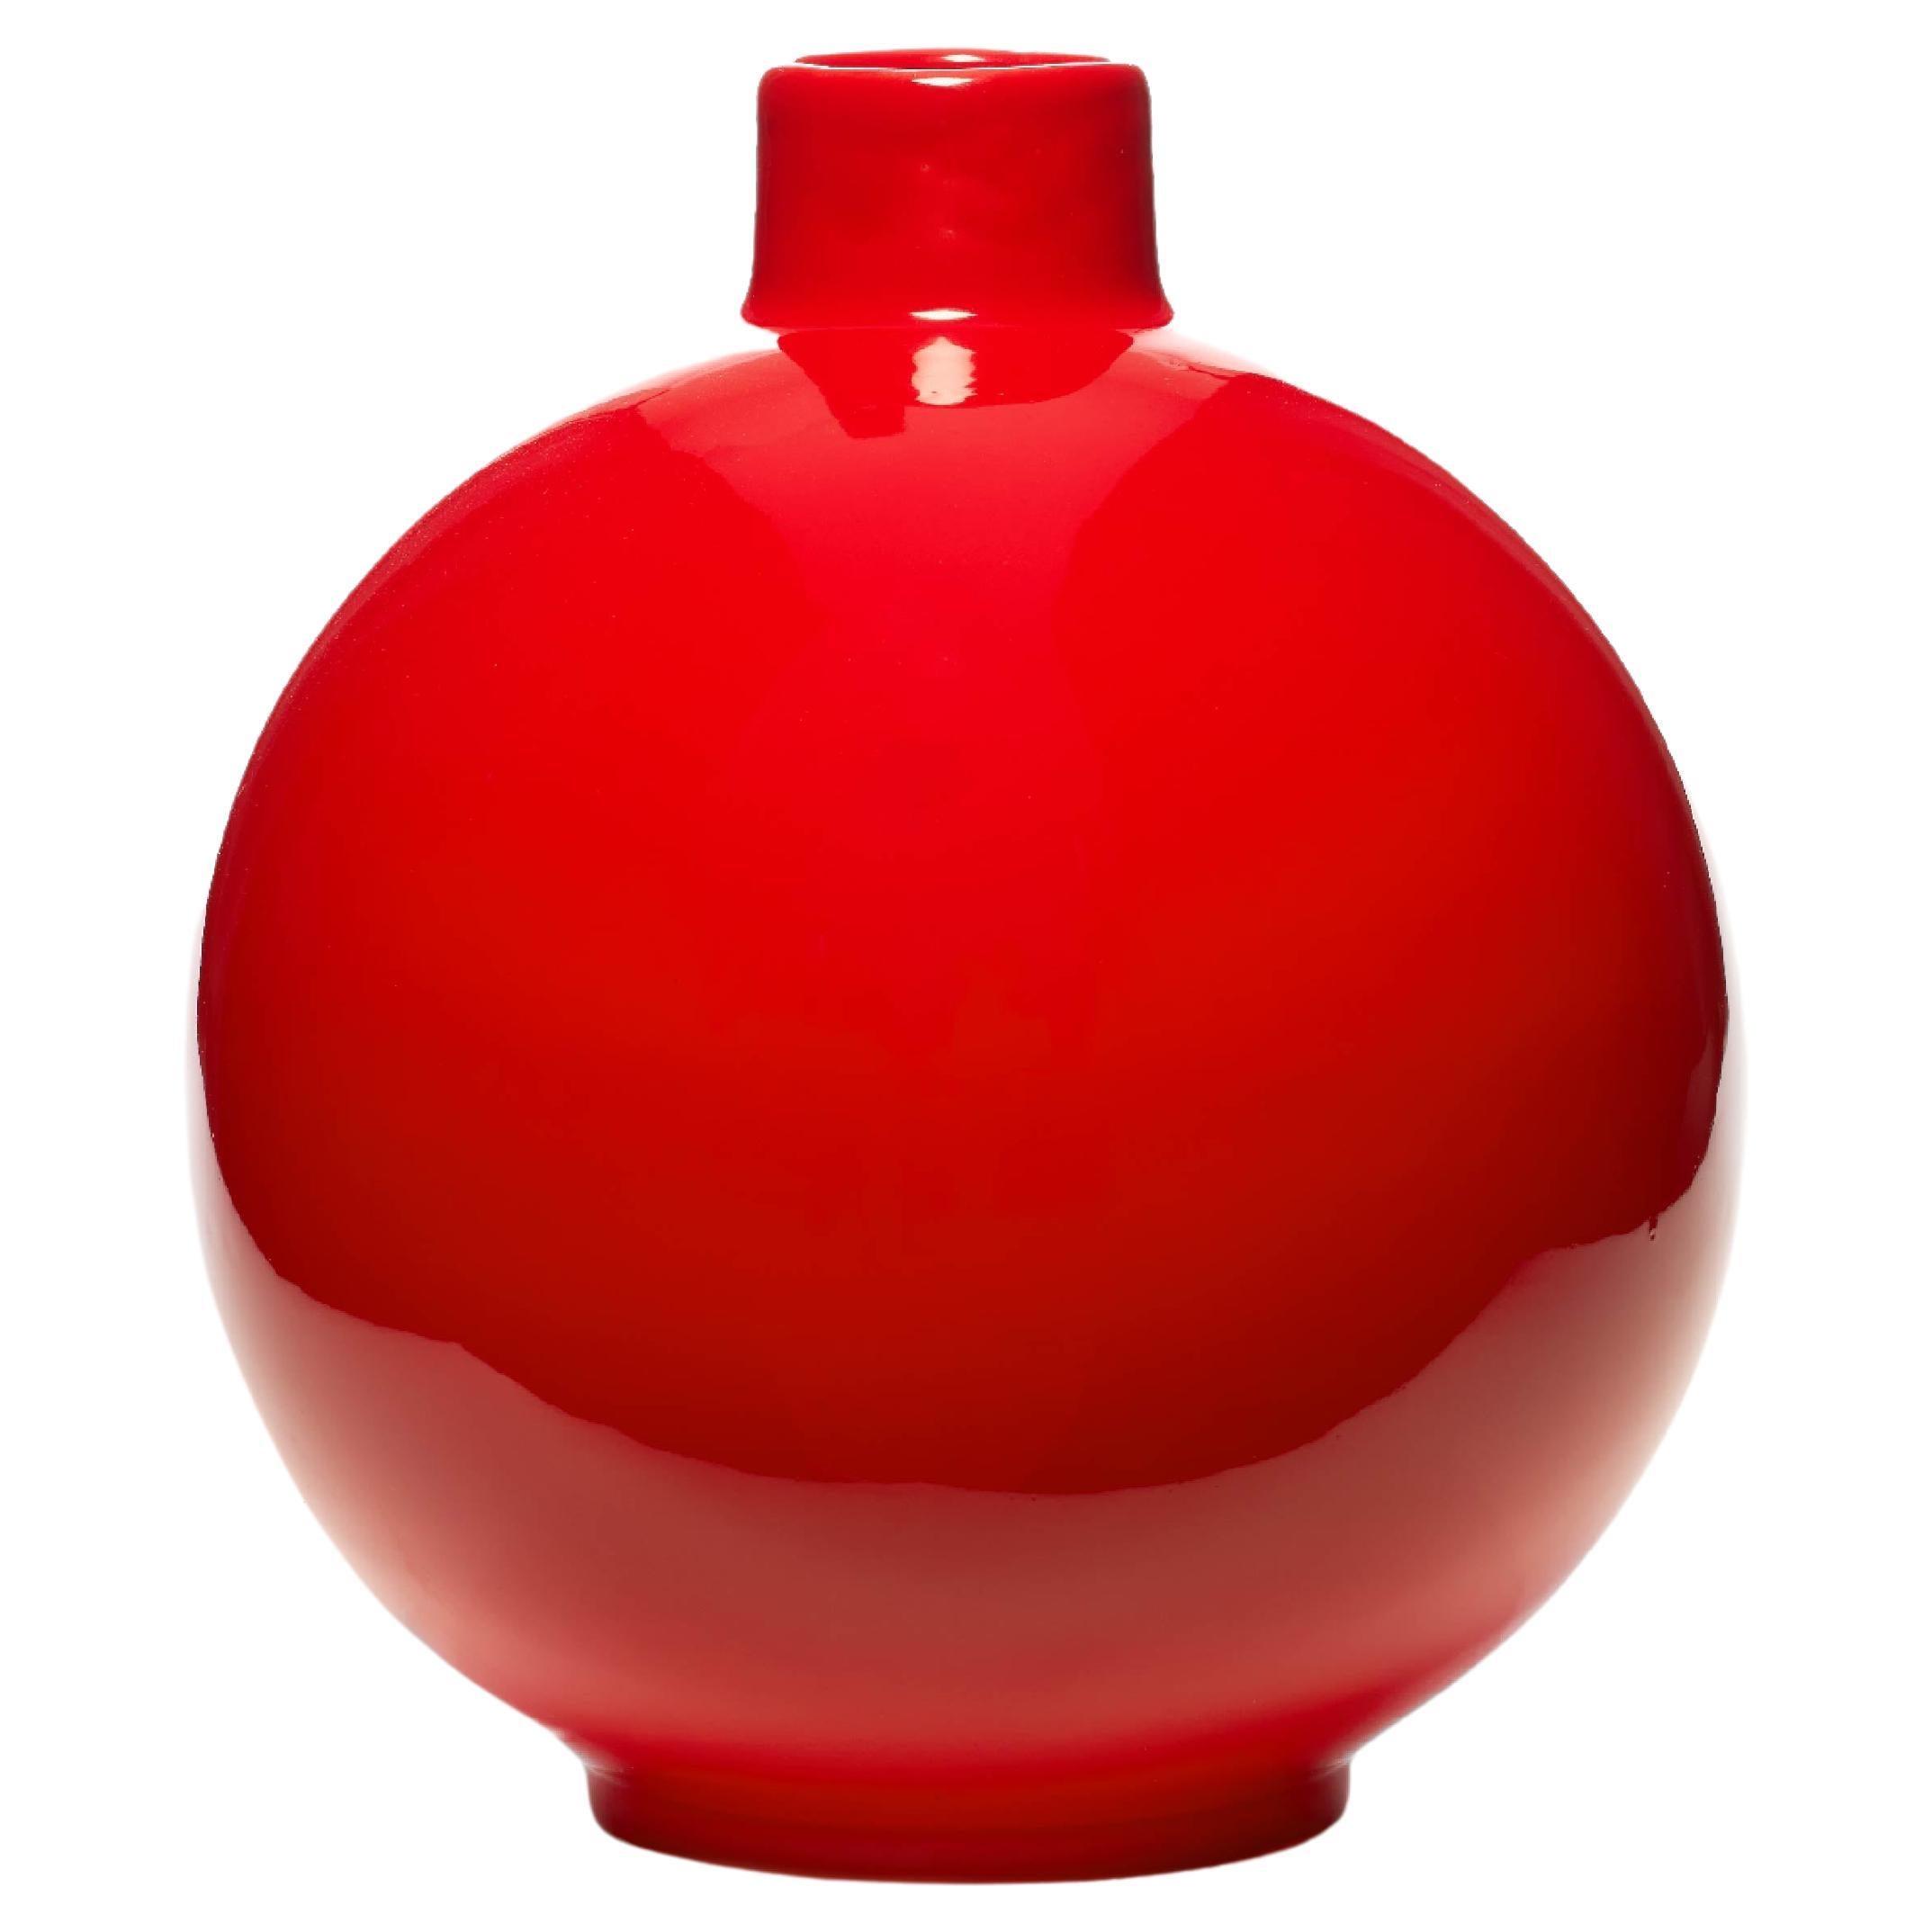 Irena Vase / Red by Malwina Konopacka For Sale